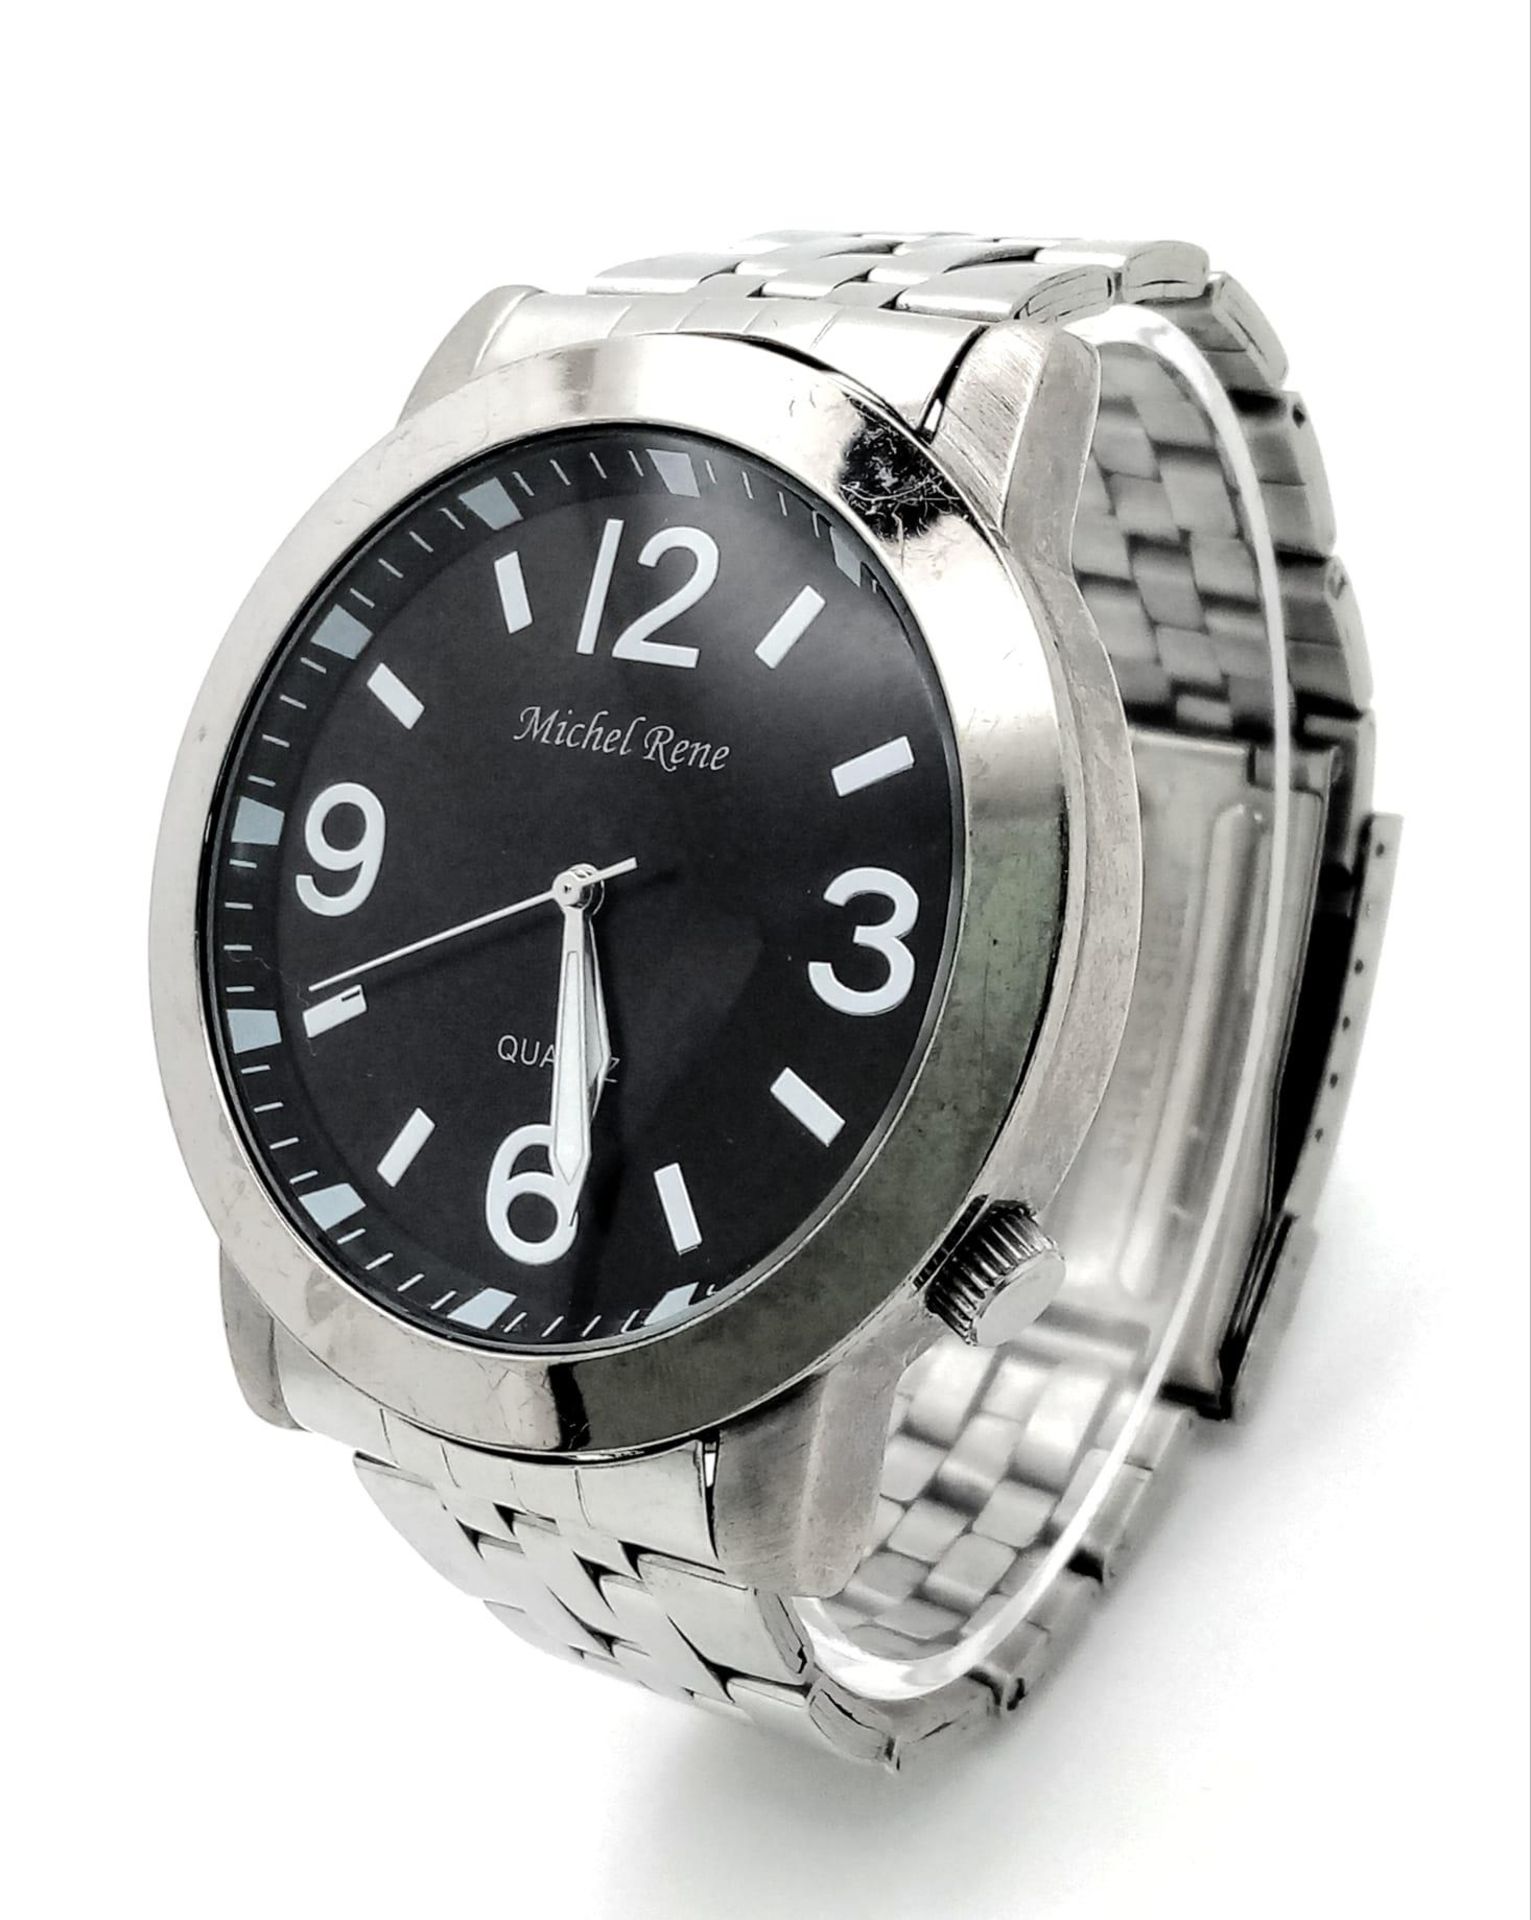 A Men’s Stainless Steel Quartz Watch by Michel Rene. 50mm Including Crown. New Battery Fitted